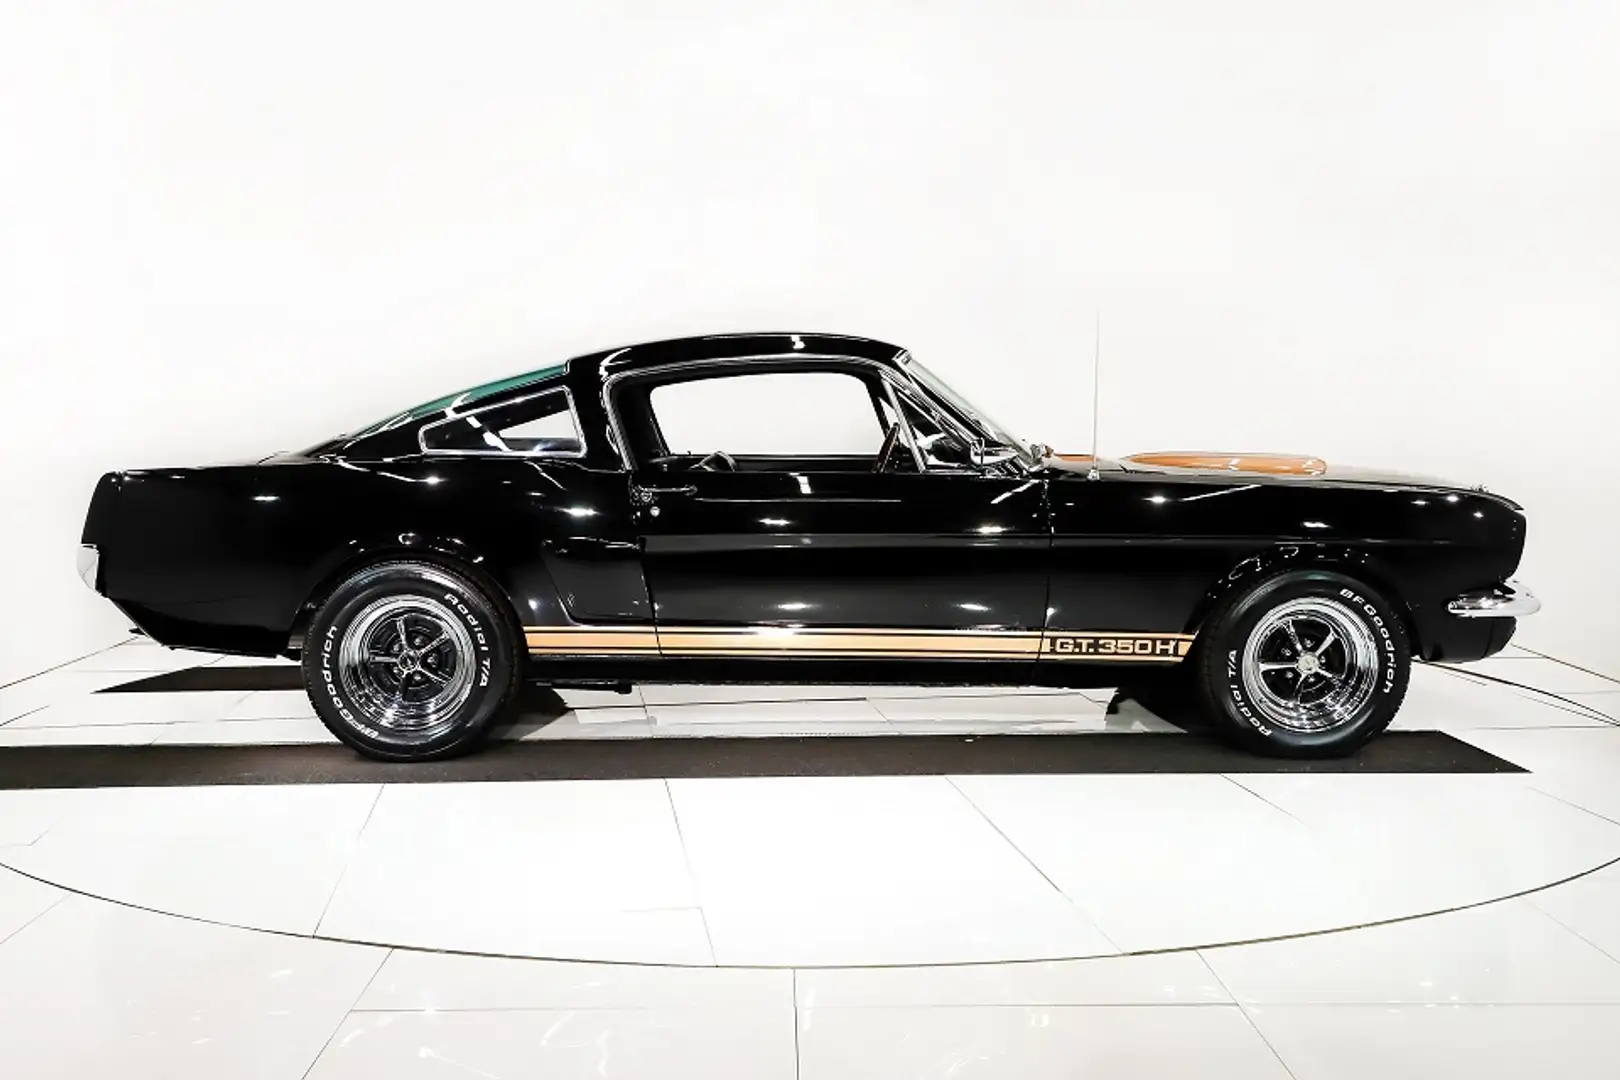 Ford Mustang Shelby Tribute - 2